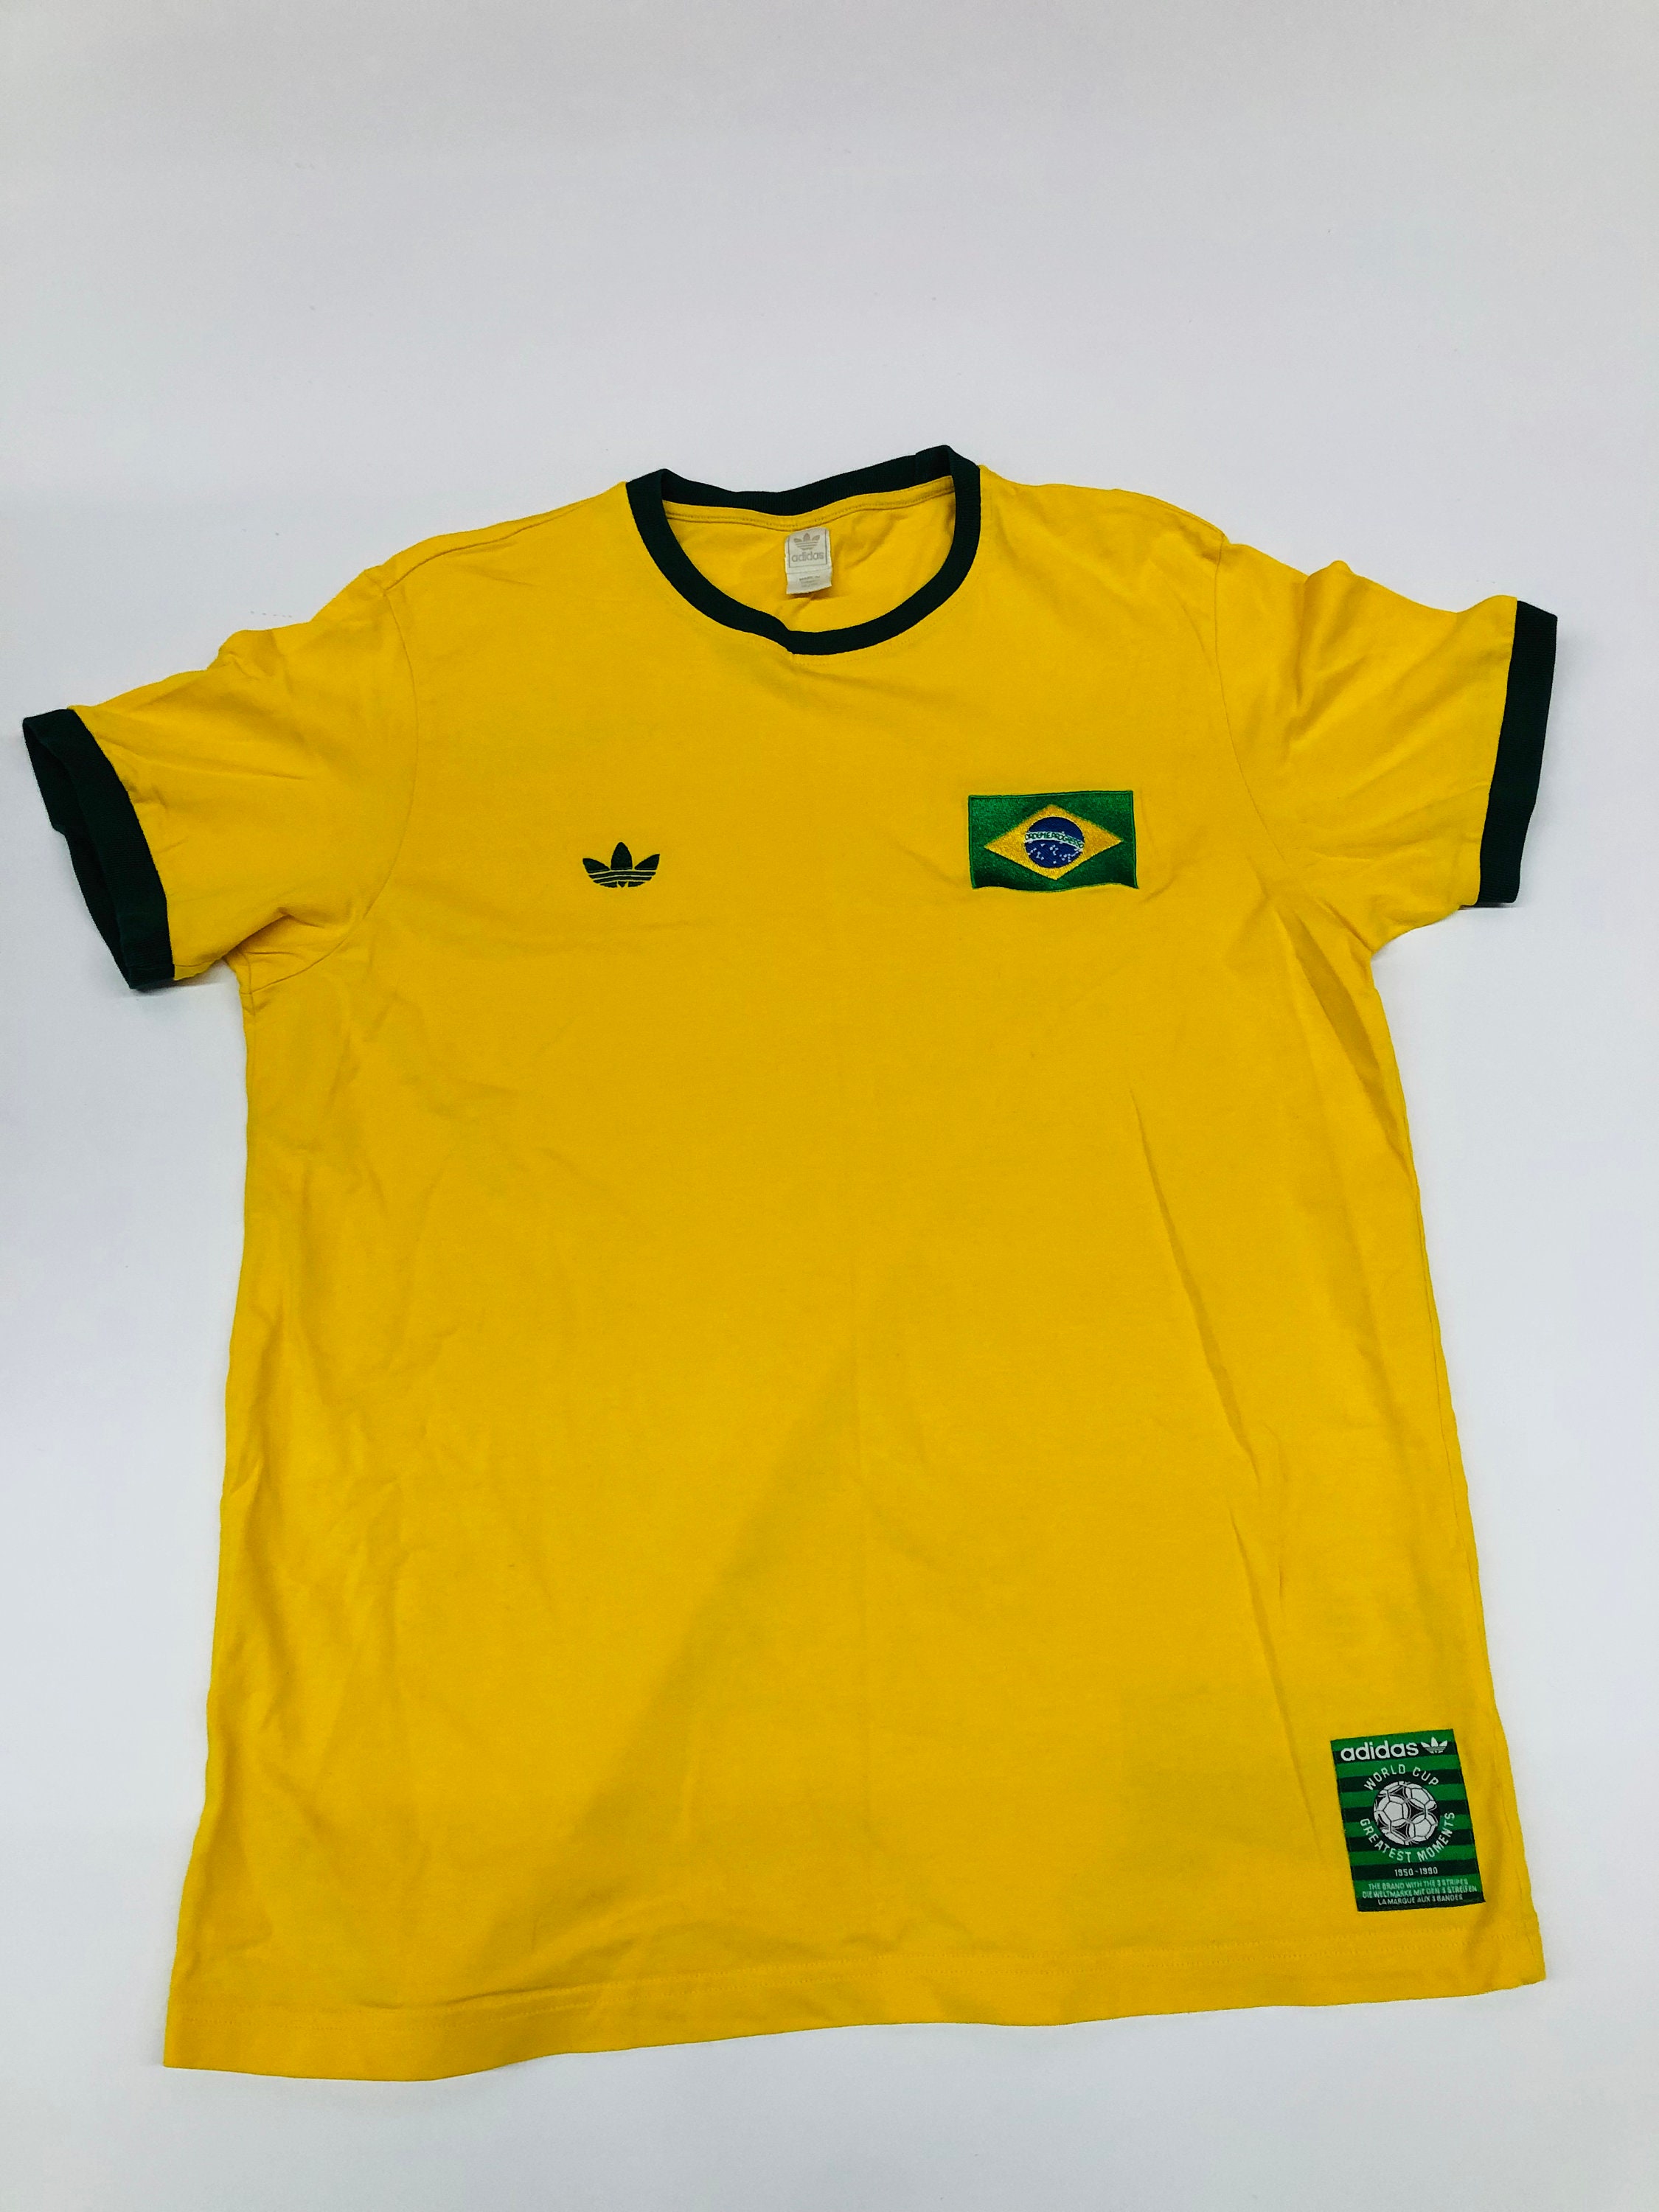 Oculto Absay persona que practica jogging Vintage Adidas Brazil Green Yellow All Time Greatest T-shirt - Etsy Israel